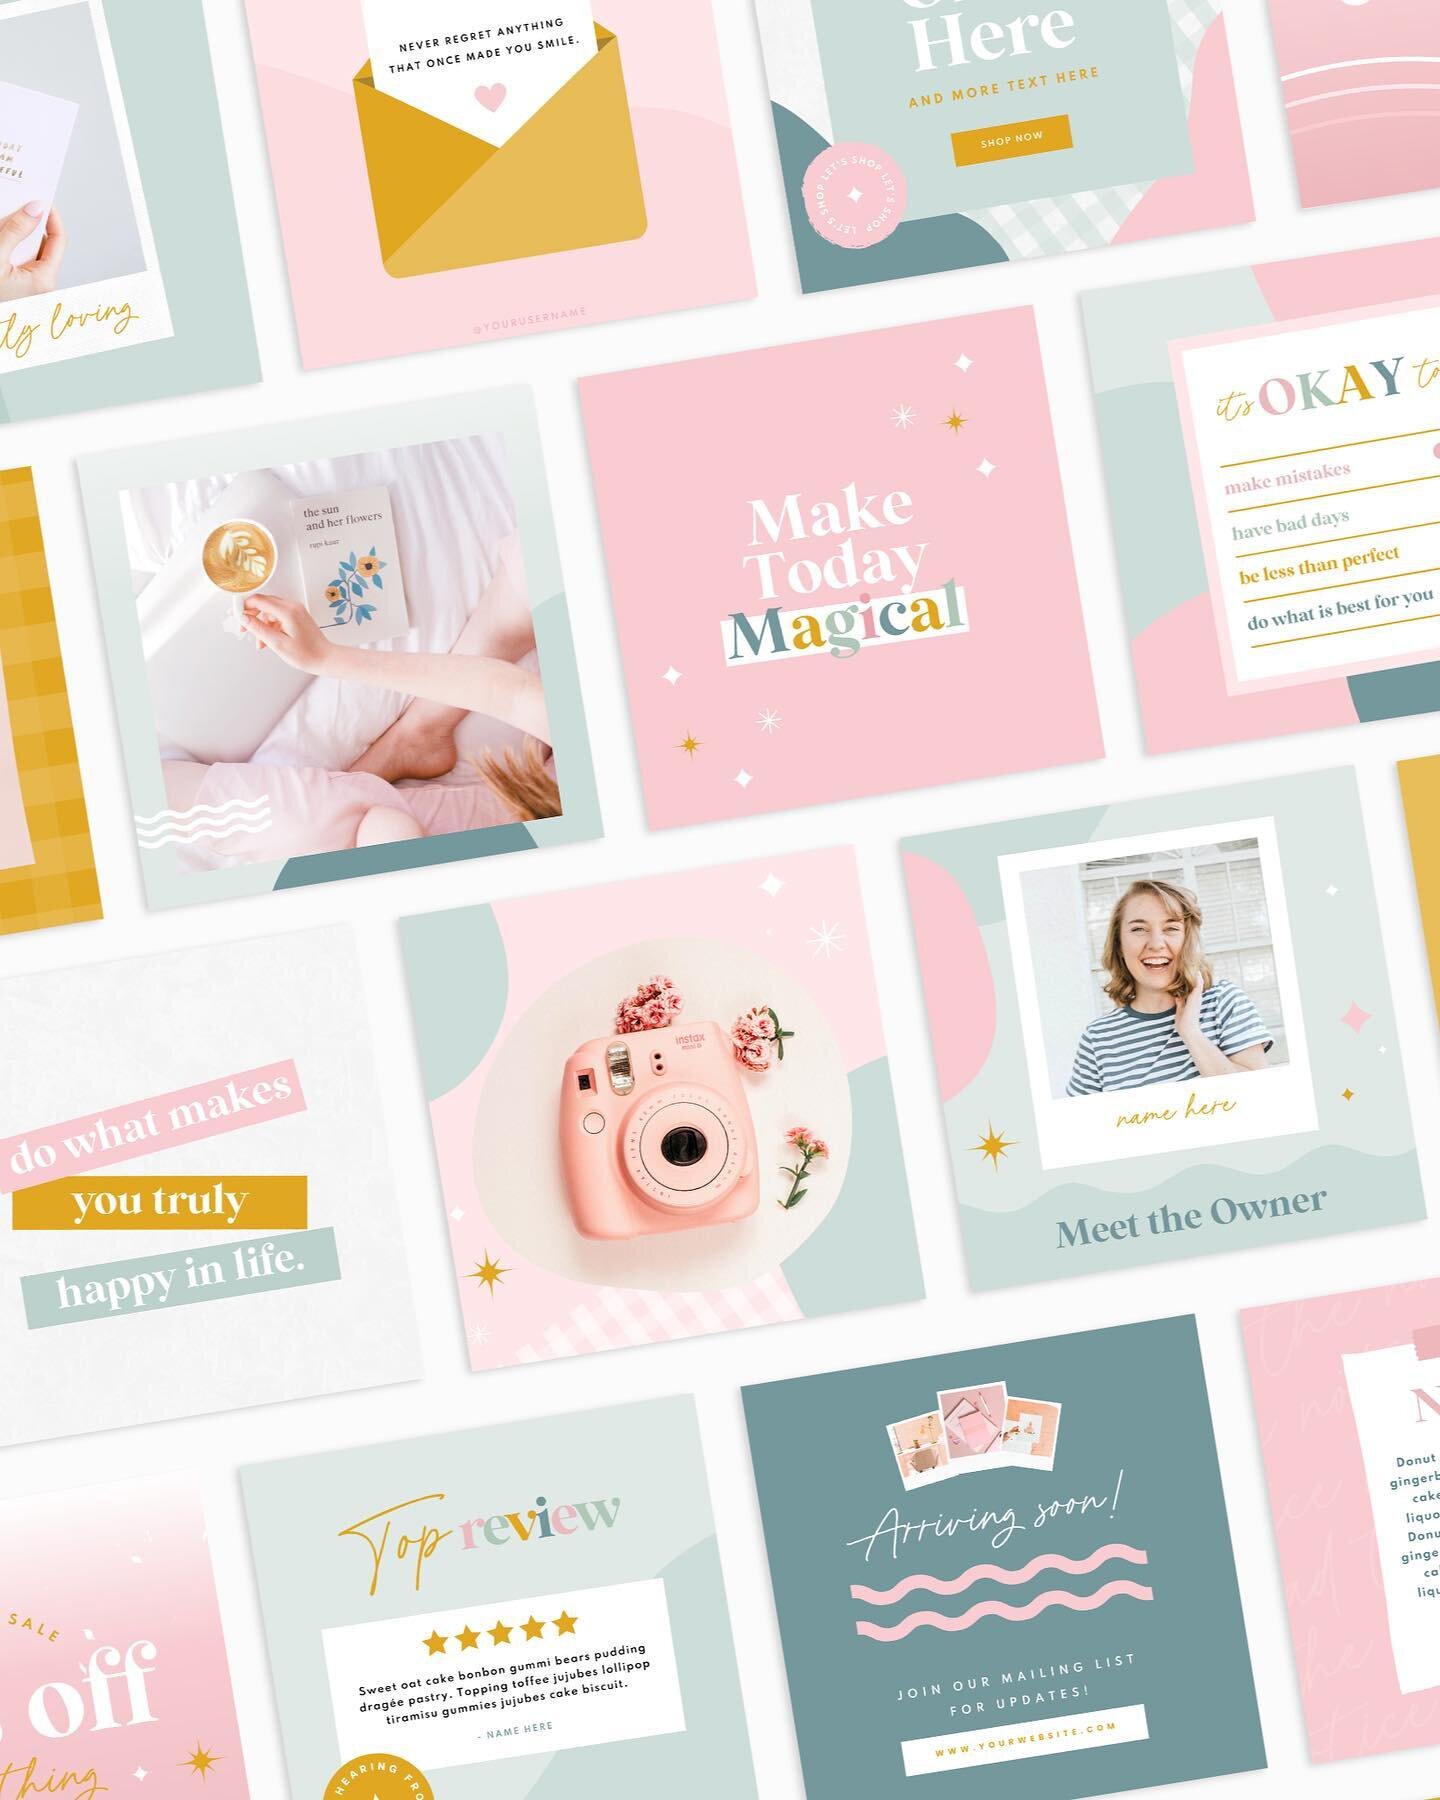 NEW ✨ Instagram post templates to edit in Canva in fun pastel rainbow colors 🌈 Find them in the Blog Pixie shop! 💗